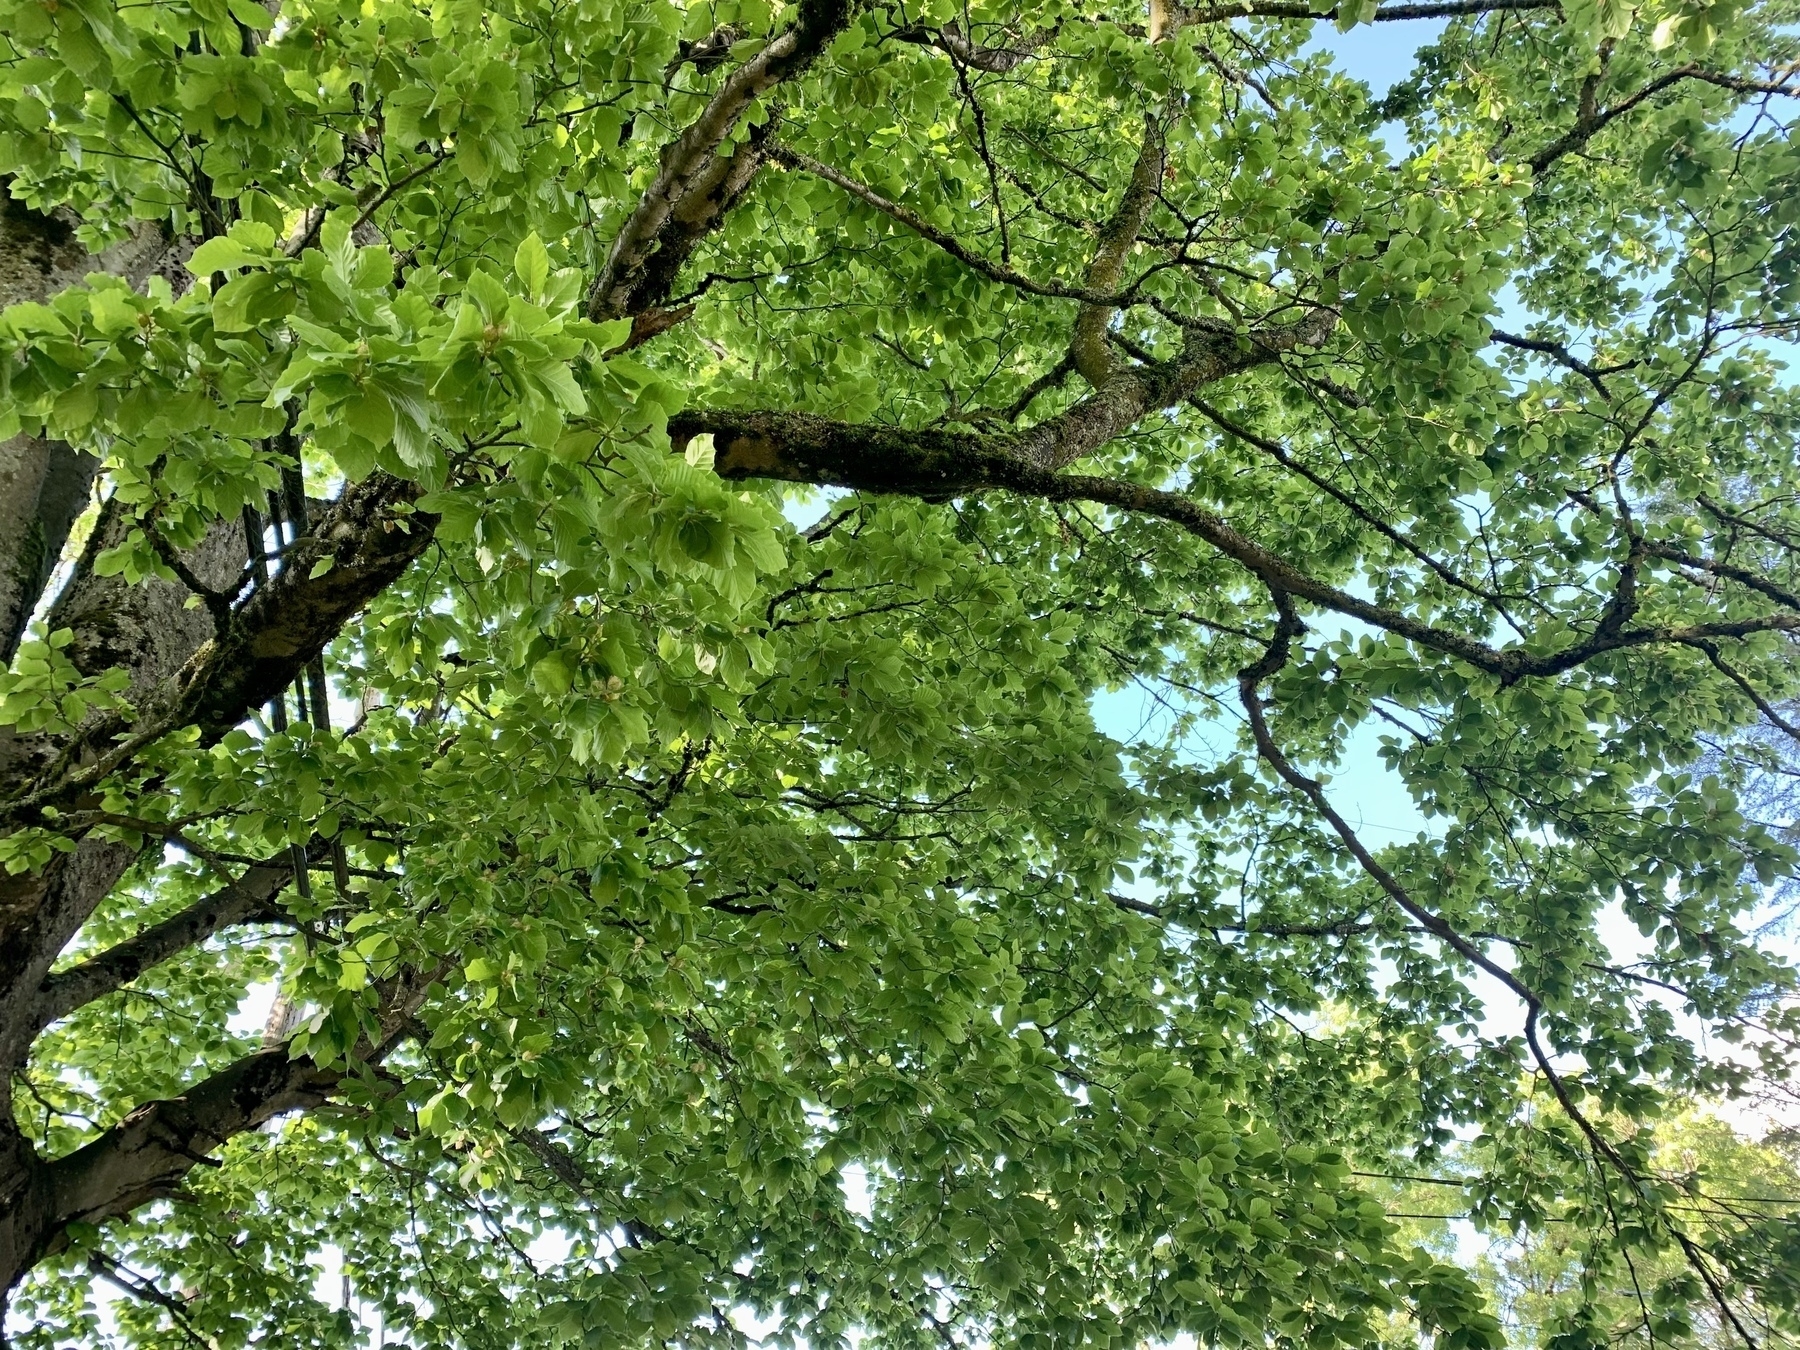 A picture of a the underside of a tree canopy.